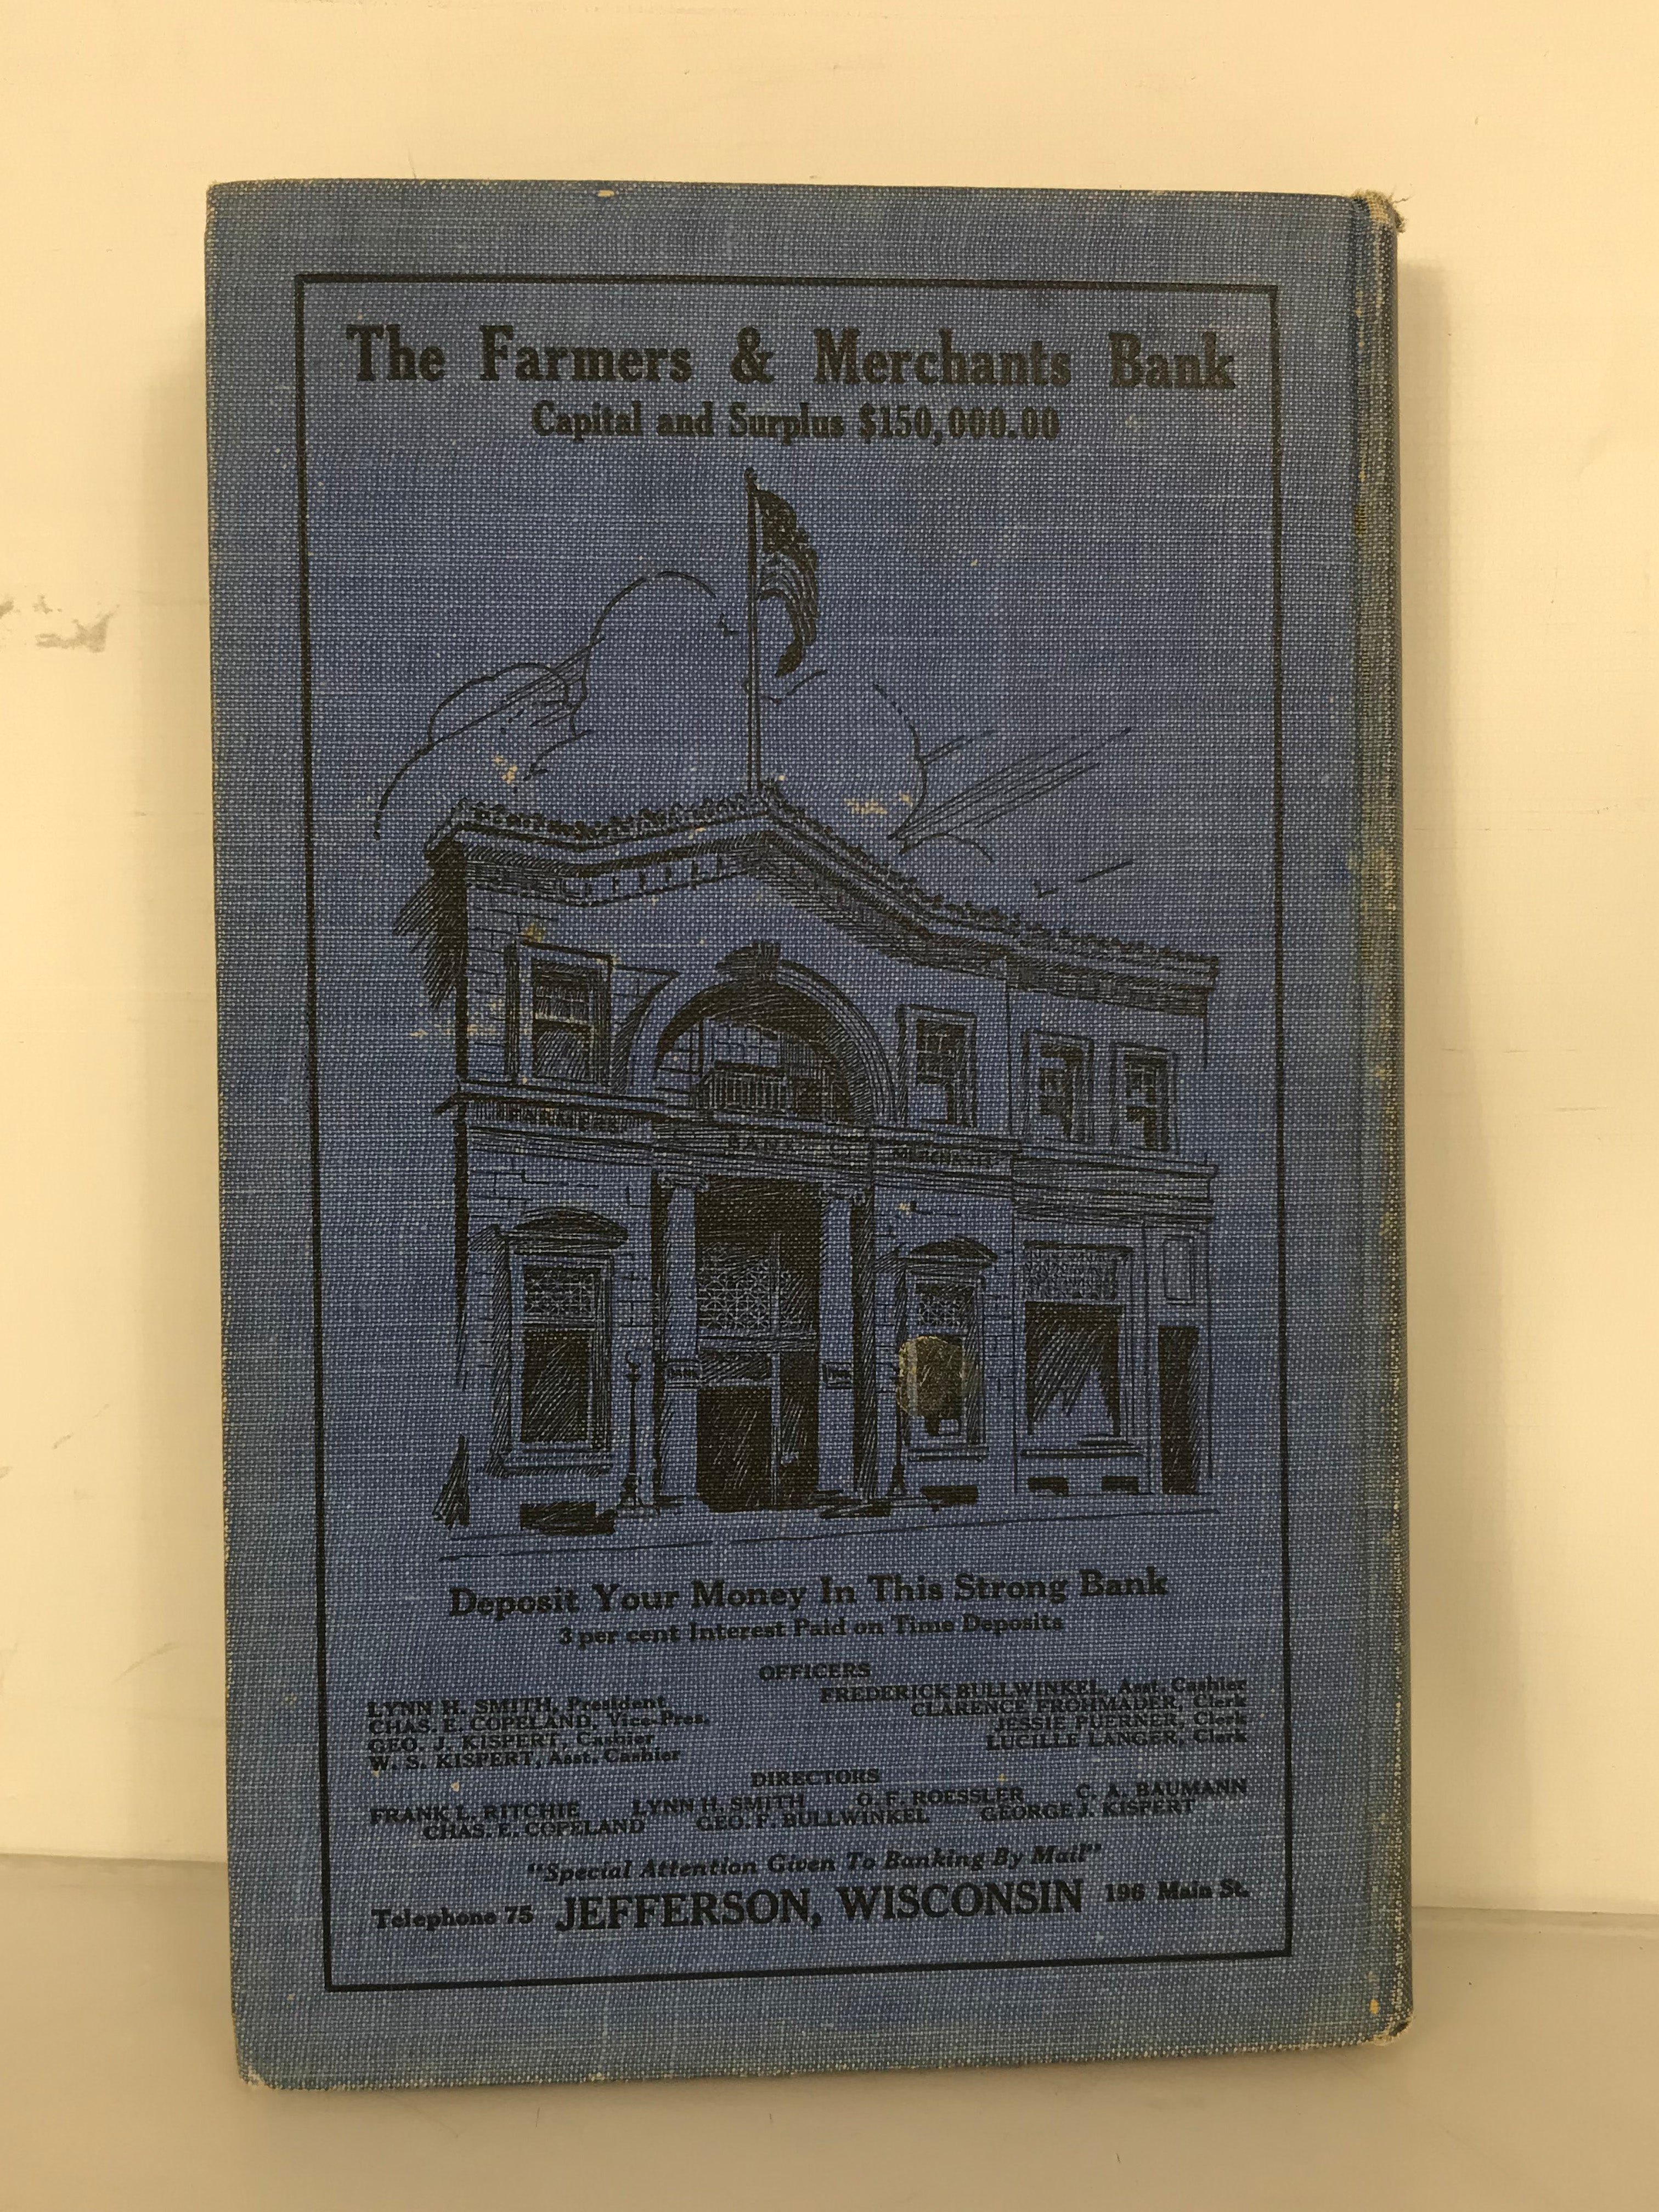 Prairie Farmer's Home and County Directory of Jefferson County WI 1927 HC